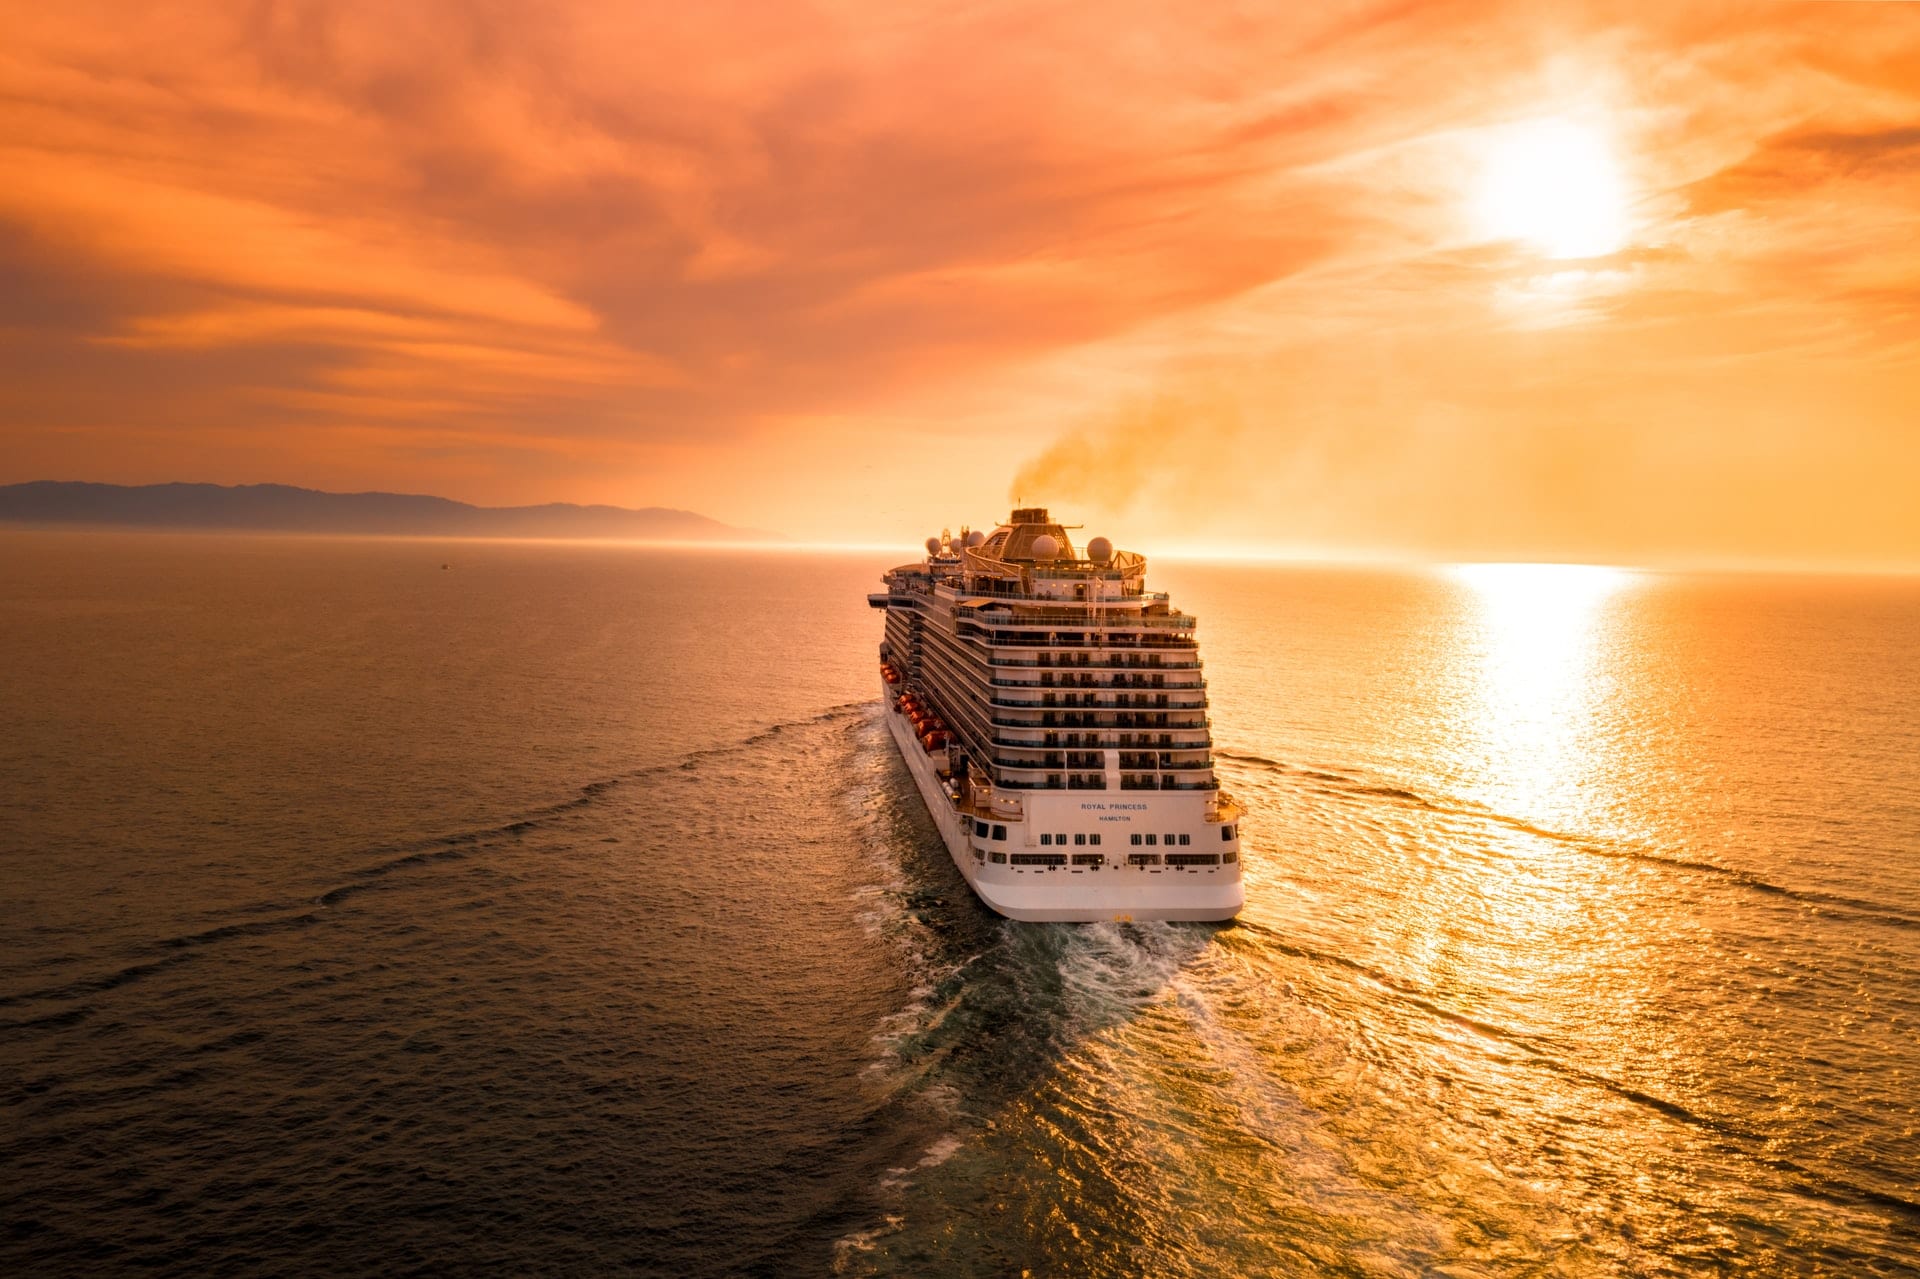 Cruise Lines Turn To Geollect To Assist With Return To Operations